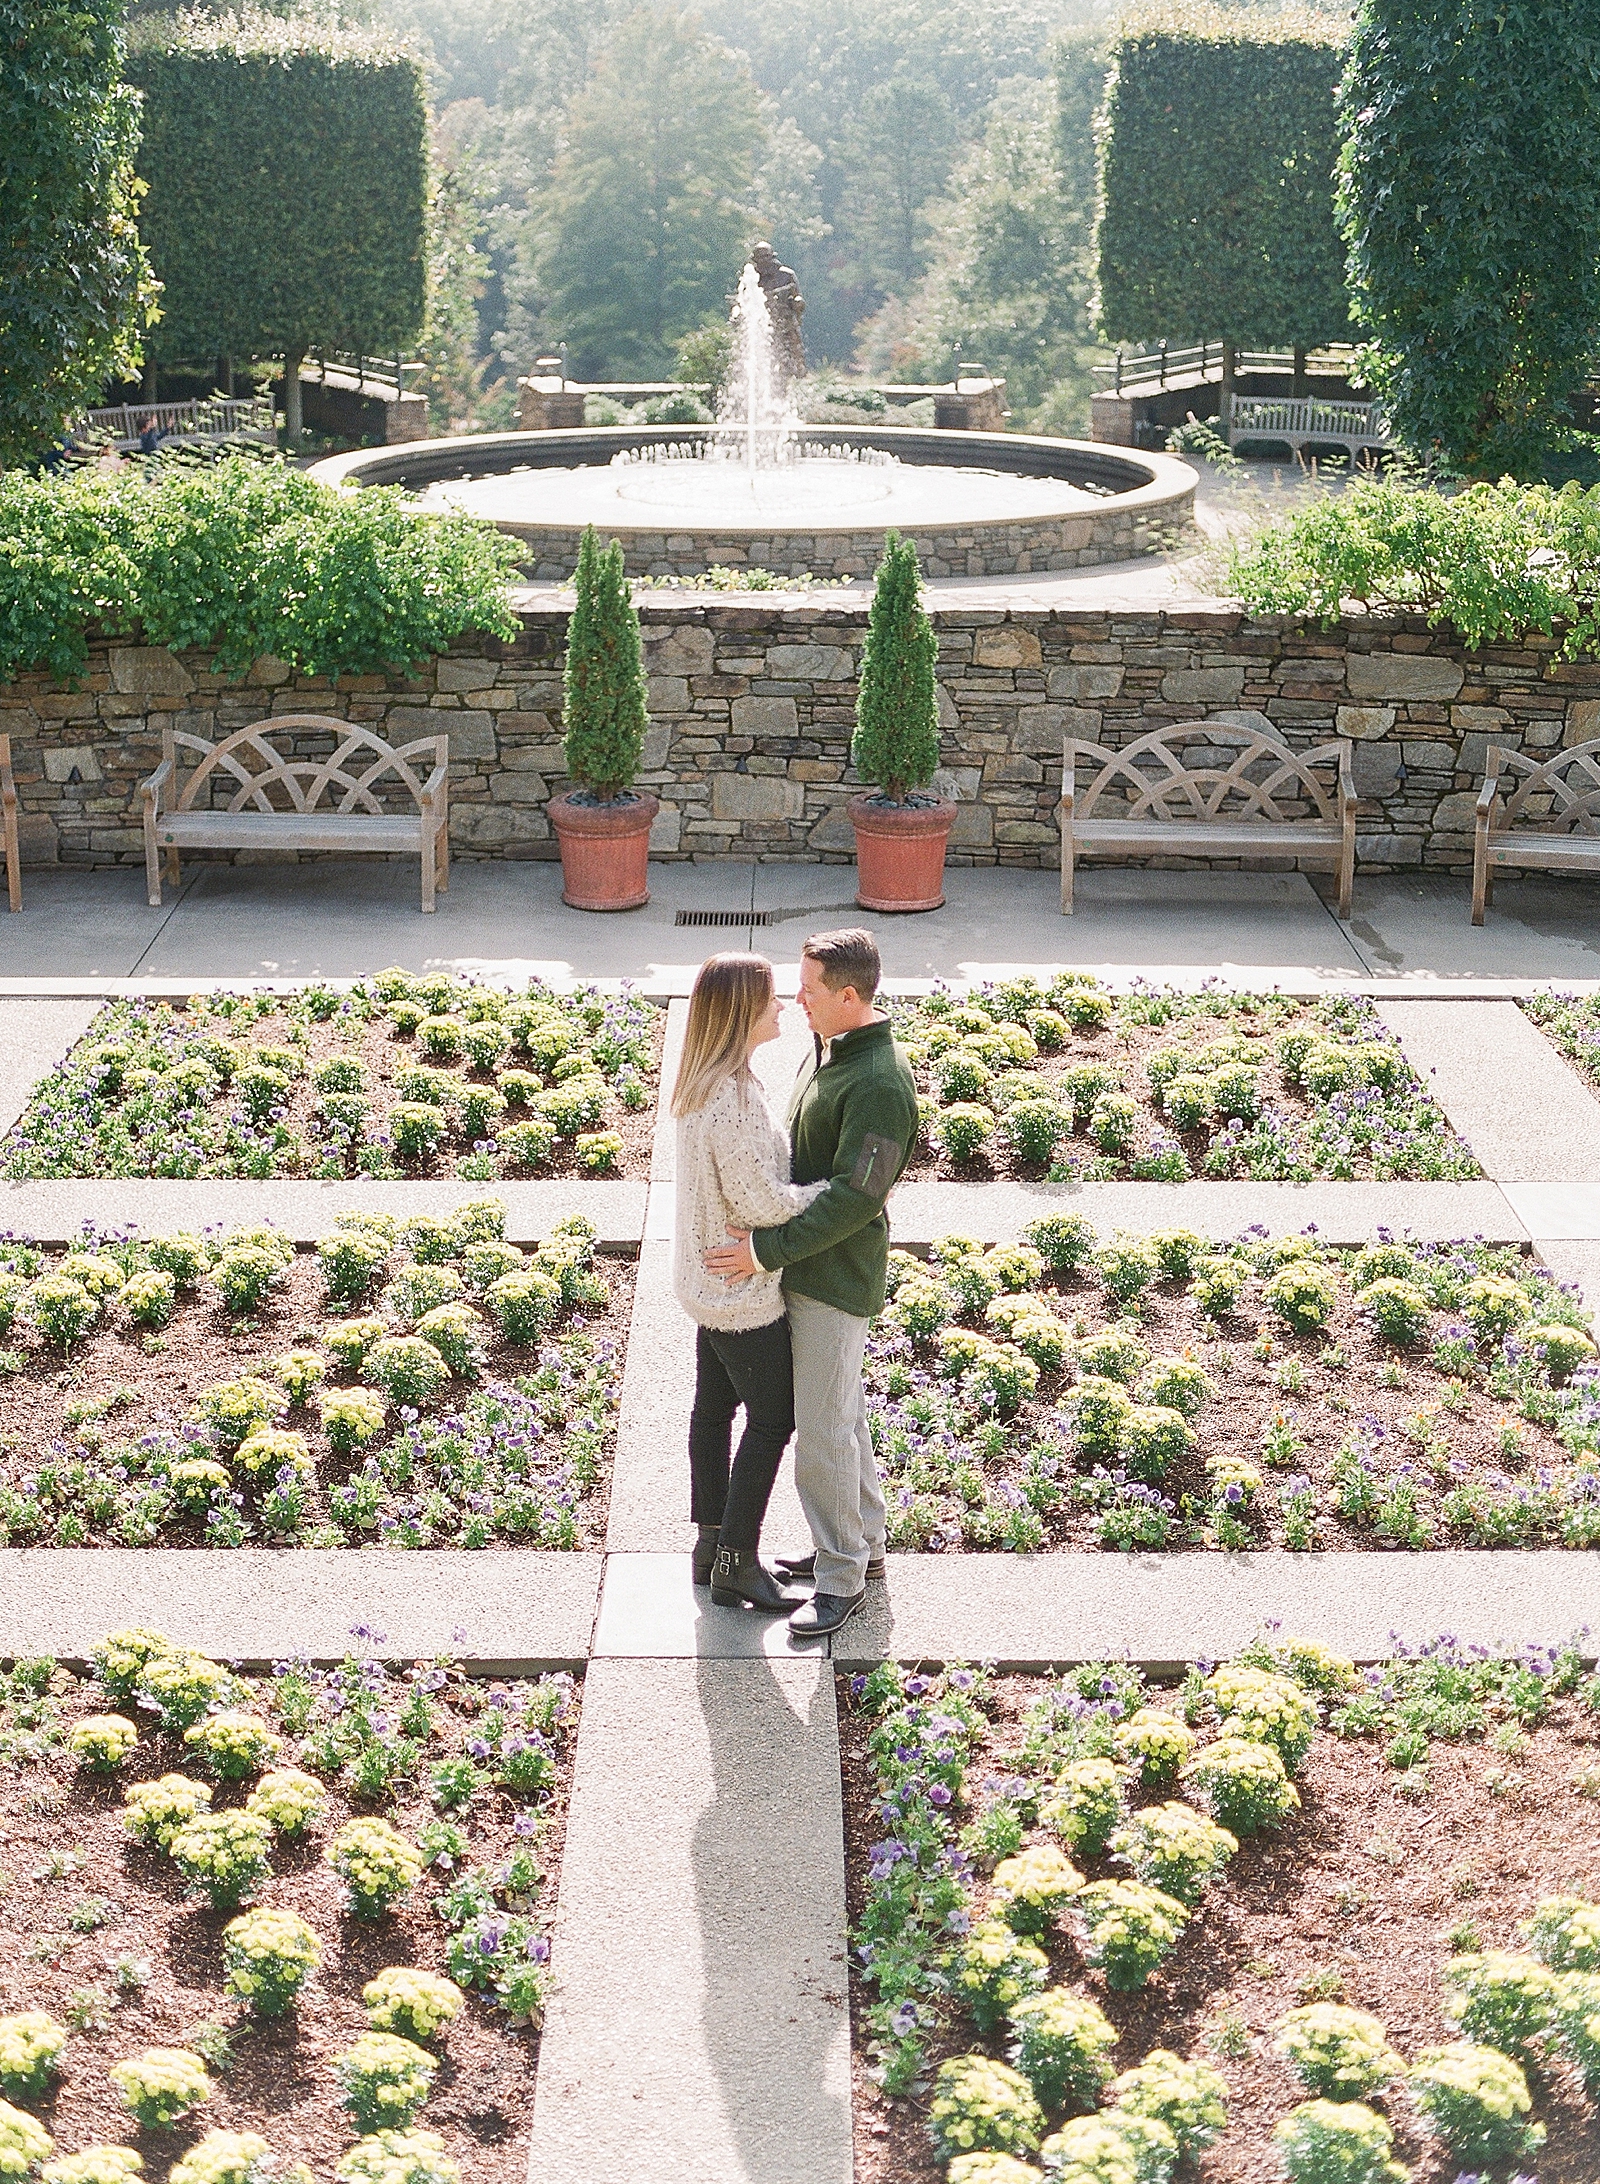 North Carolina Arboretum Couple Hugging in Garden with Fountain in background Photo